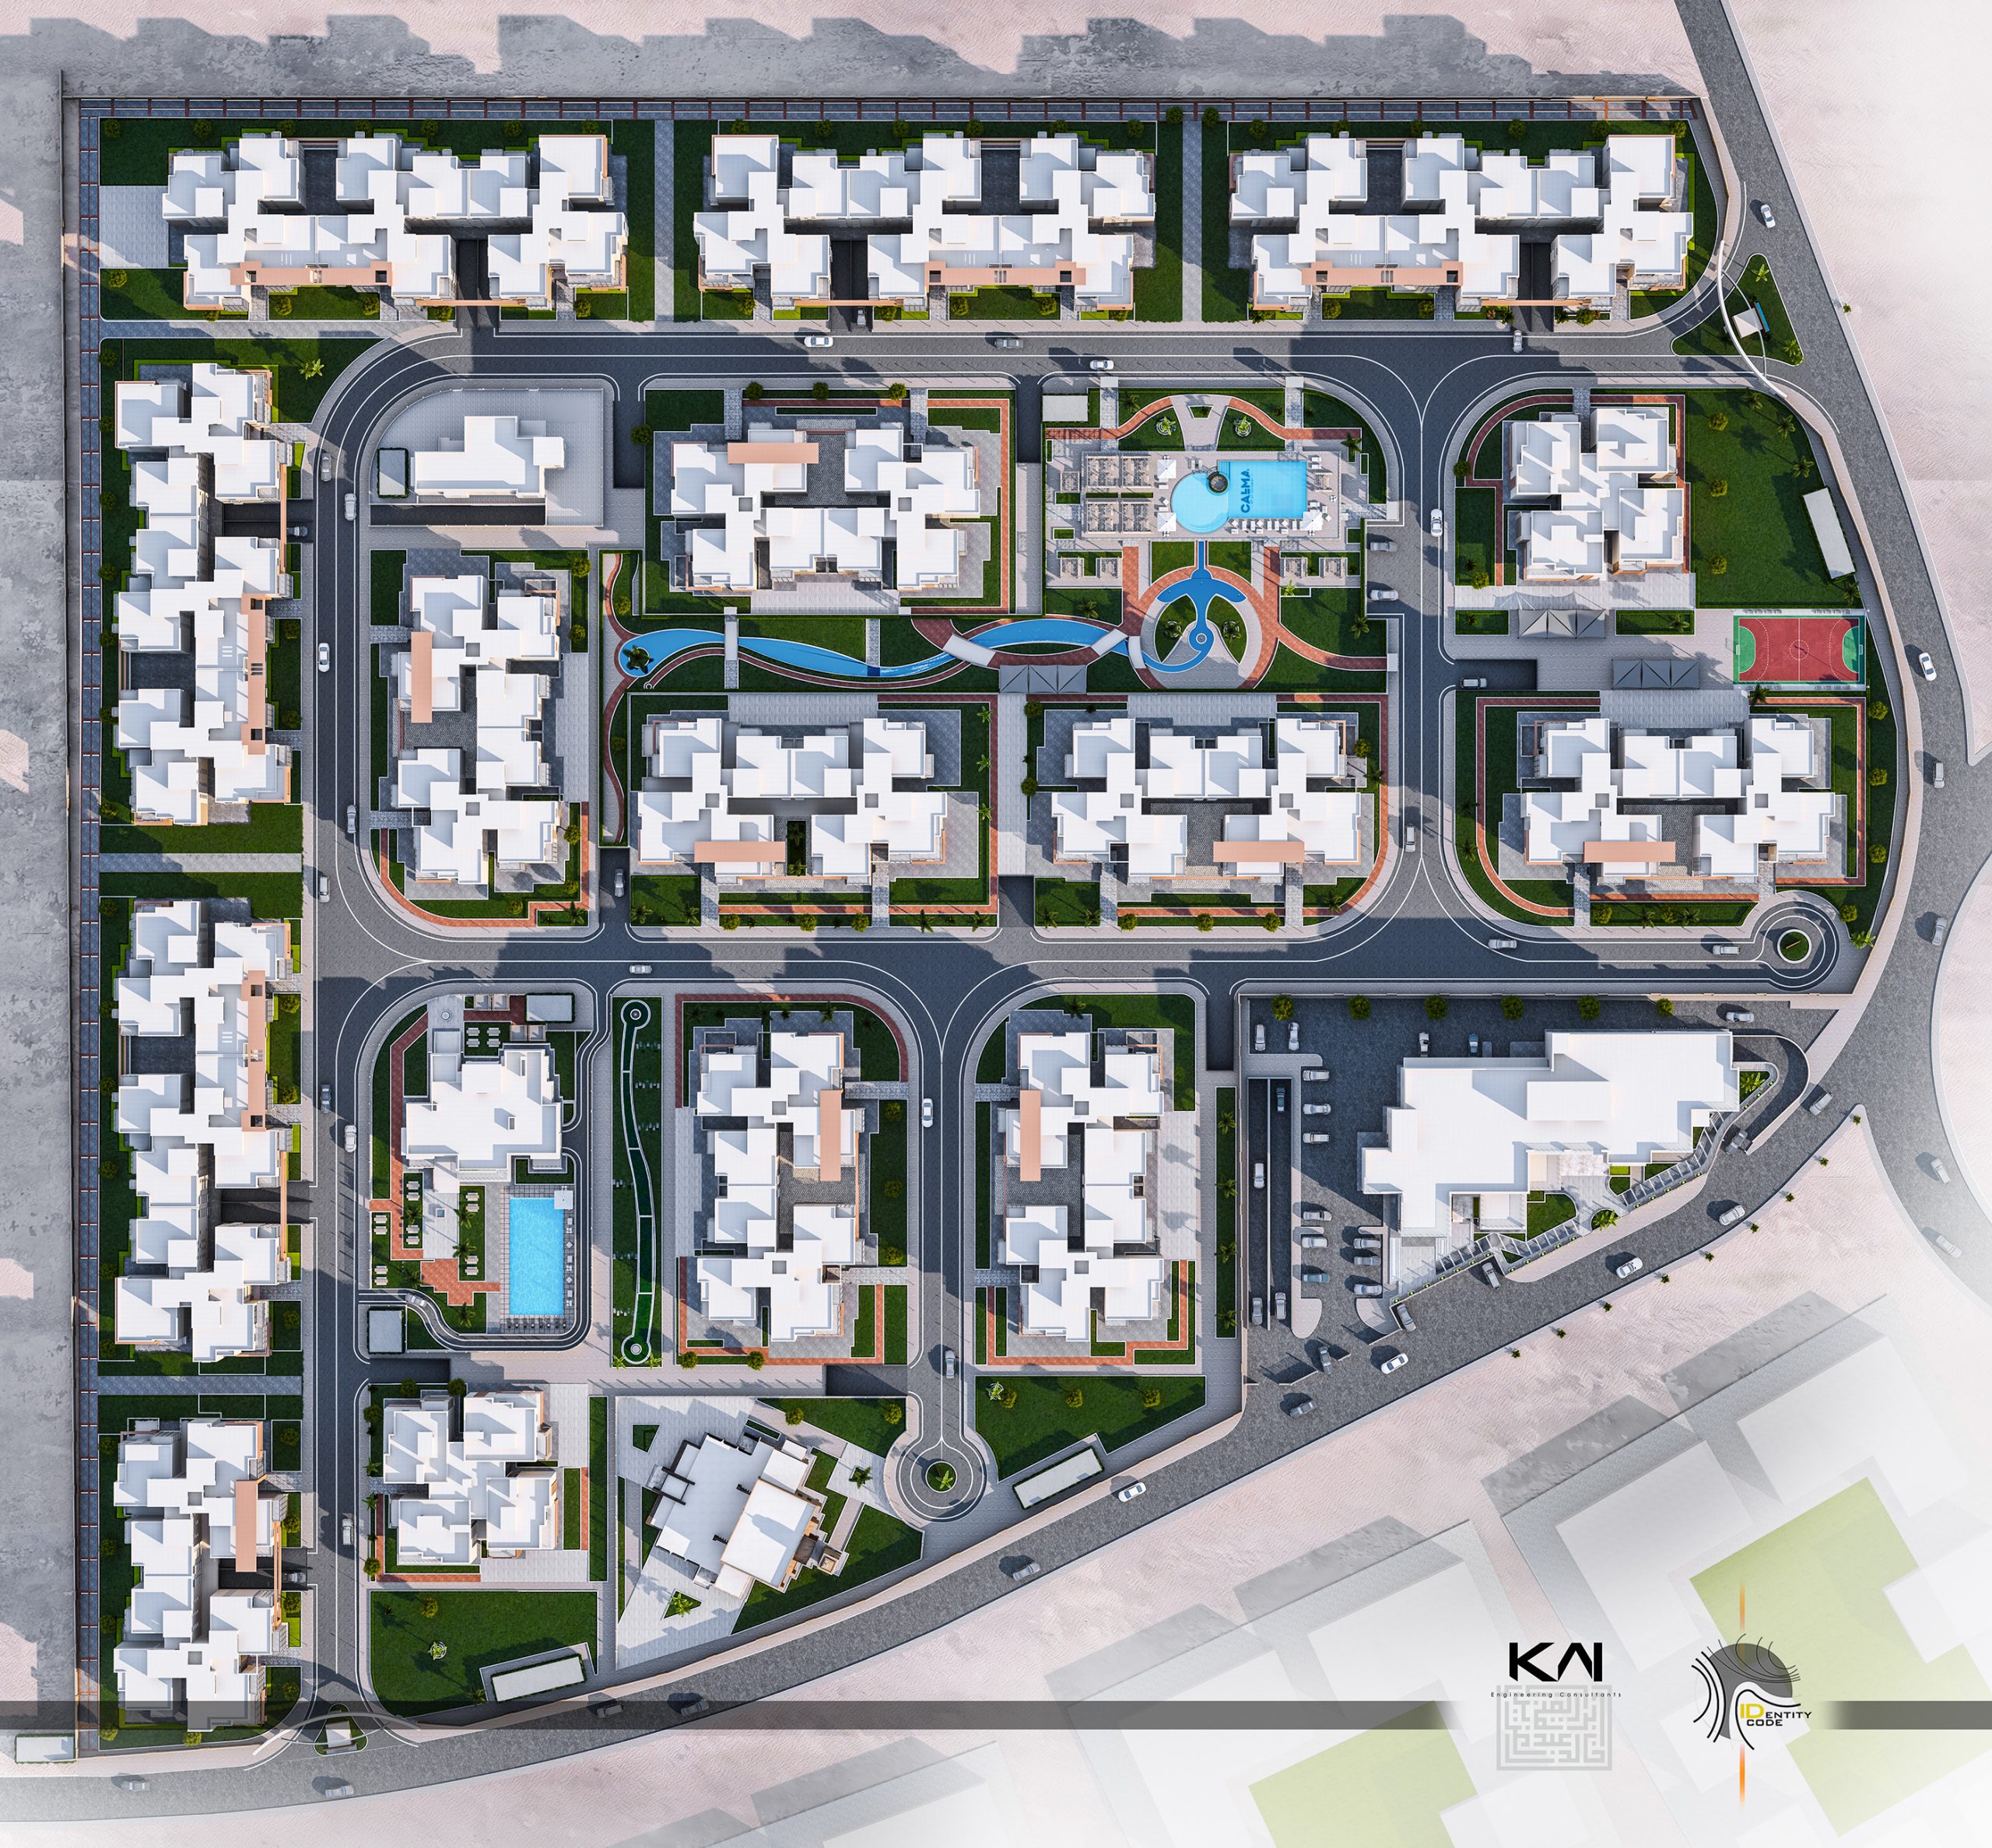 Own your unit now in Calma Gardens October compound at special prices